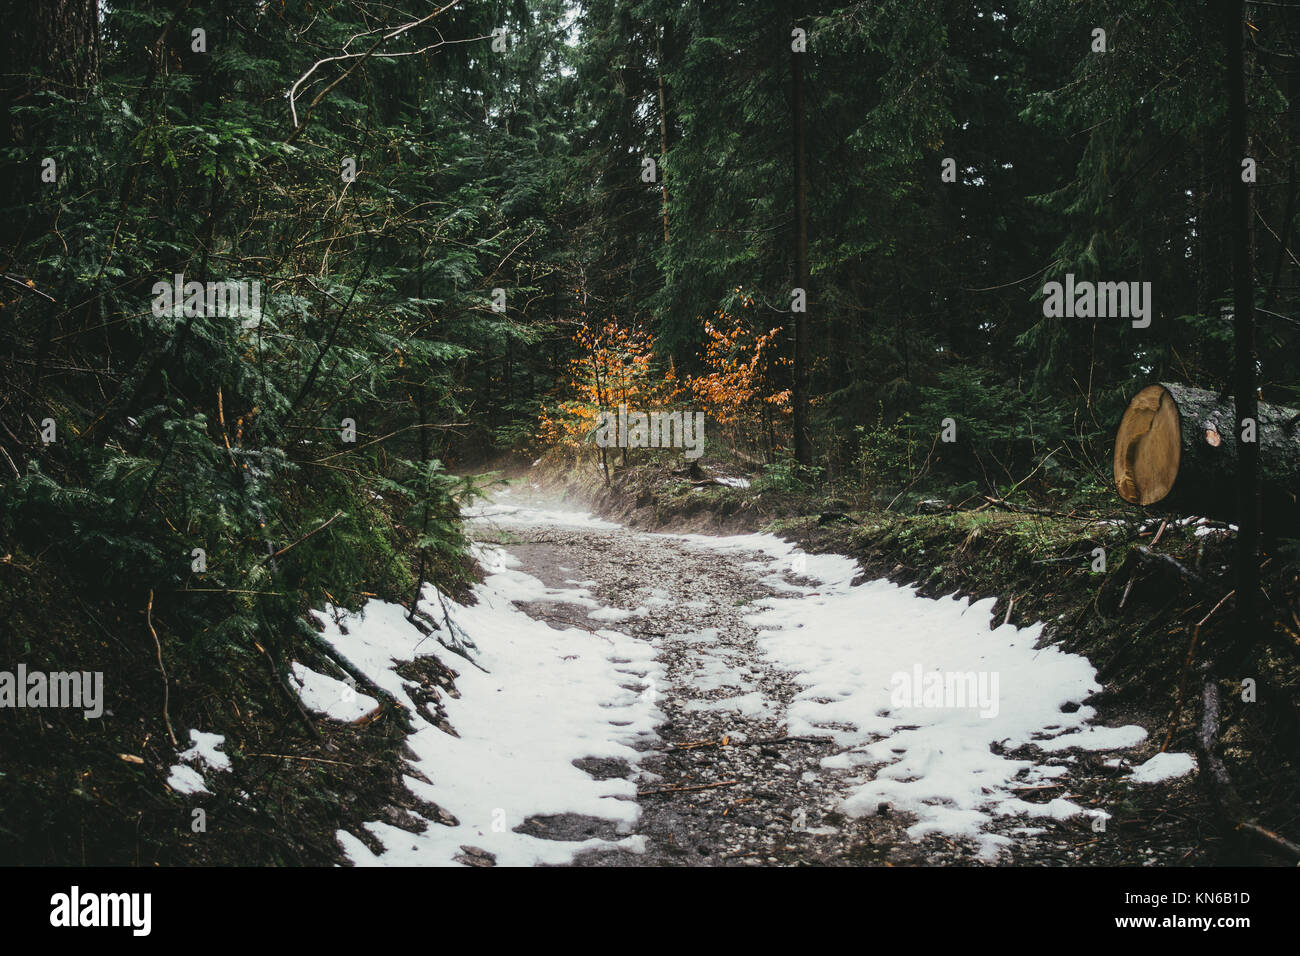 Hiking path in forest with snow and some mist Stock Photo